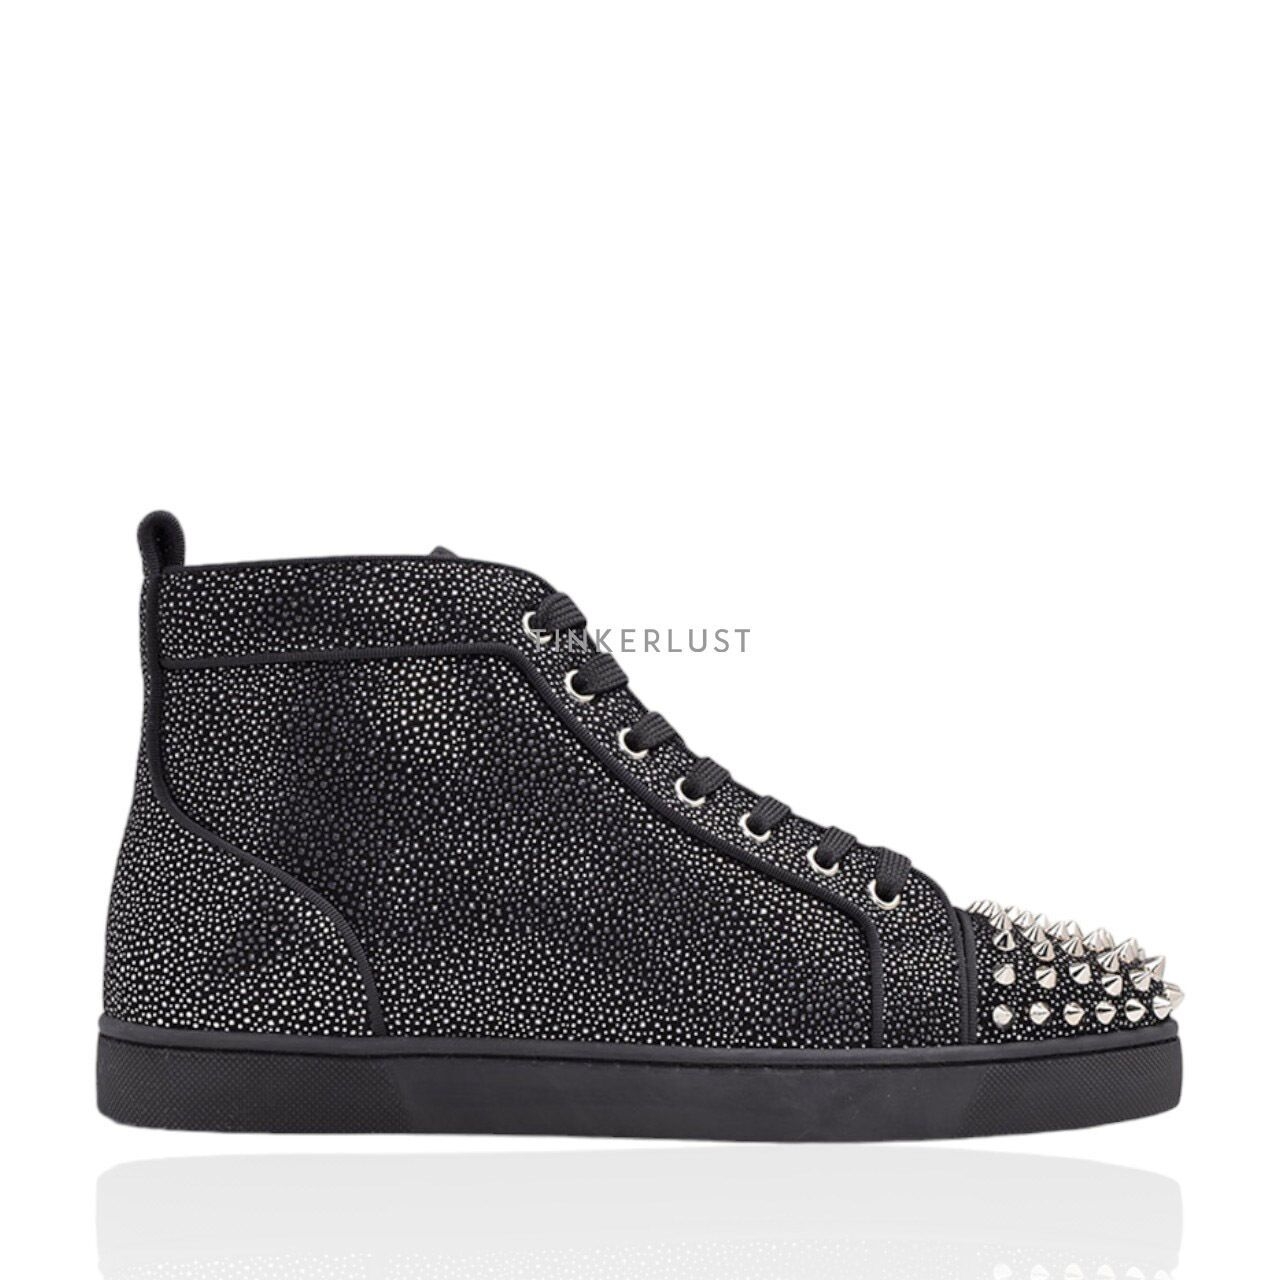 Christian Louboutin Men Lou Spikes Orlato High Top Sneakers in Version Black Creative Leather